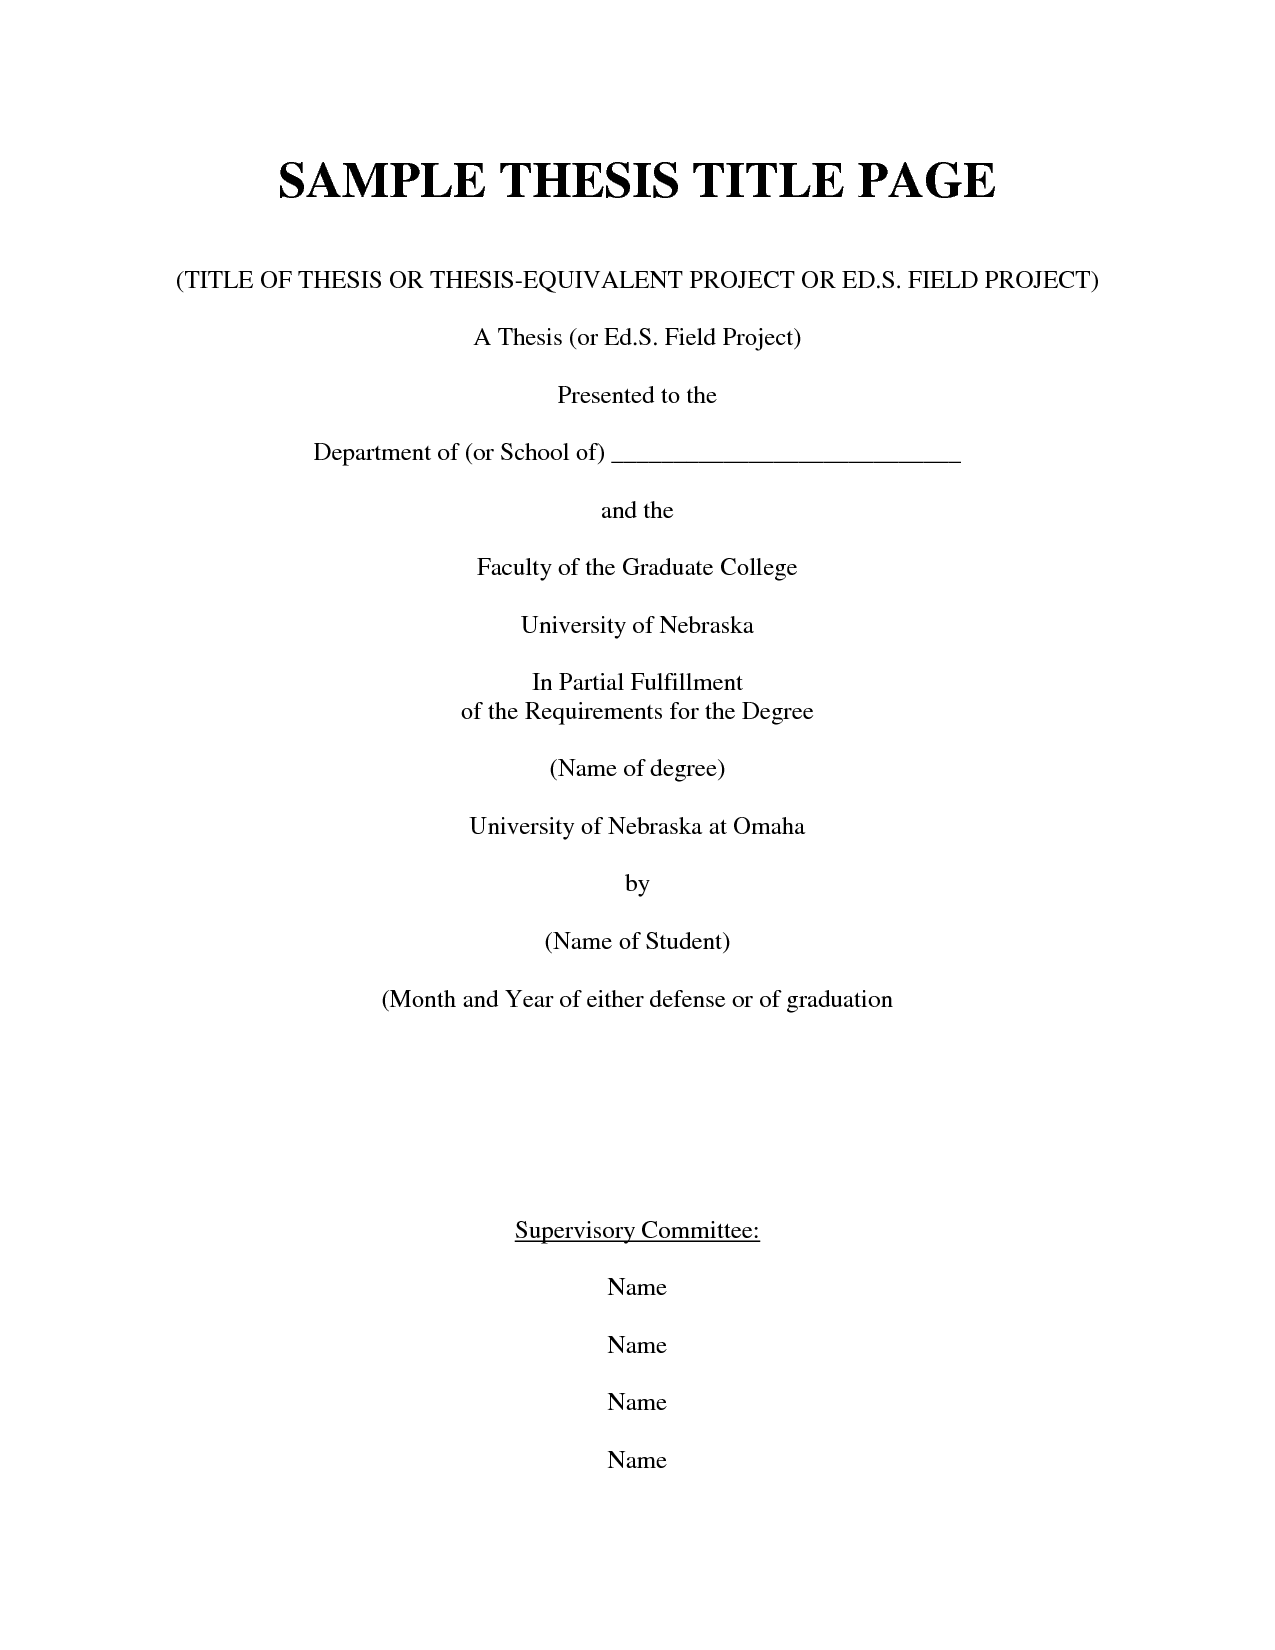 thesis title page example